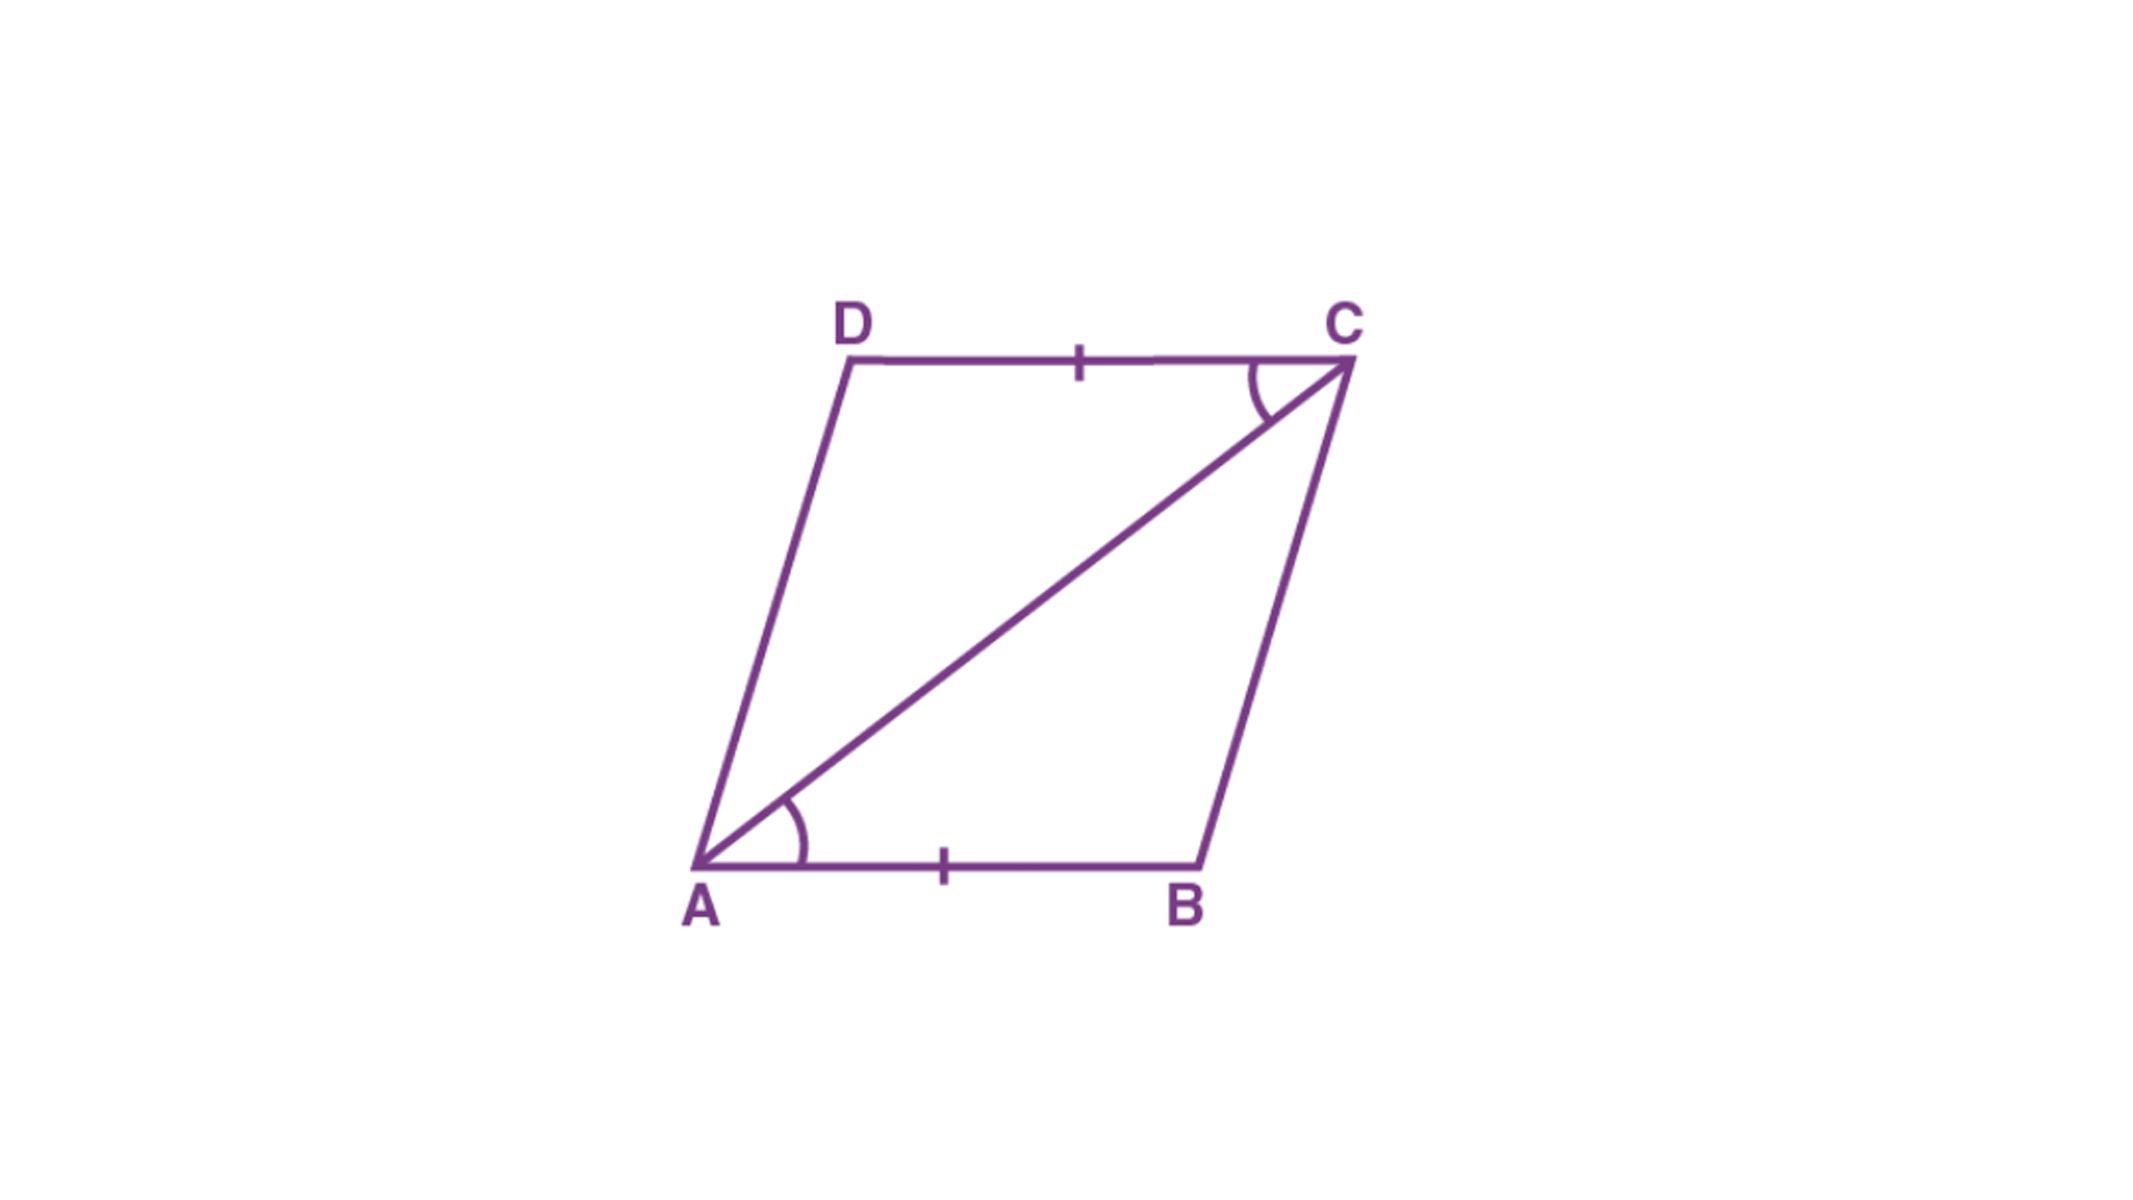 Mind-Blowing Quadrilateral Revelation: Not All Four Congruent Sides Make A Square!